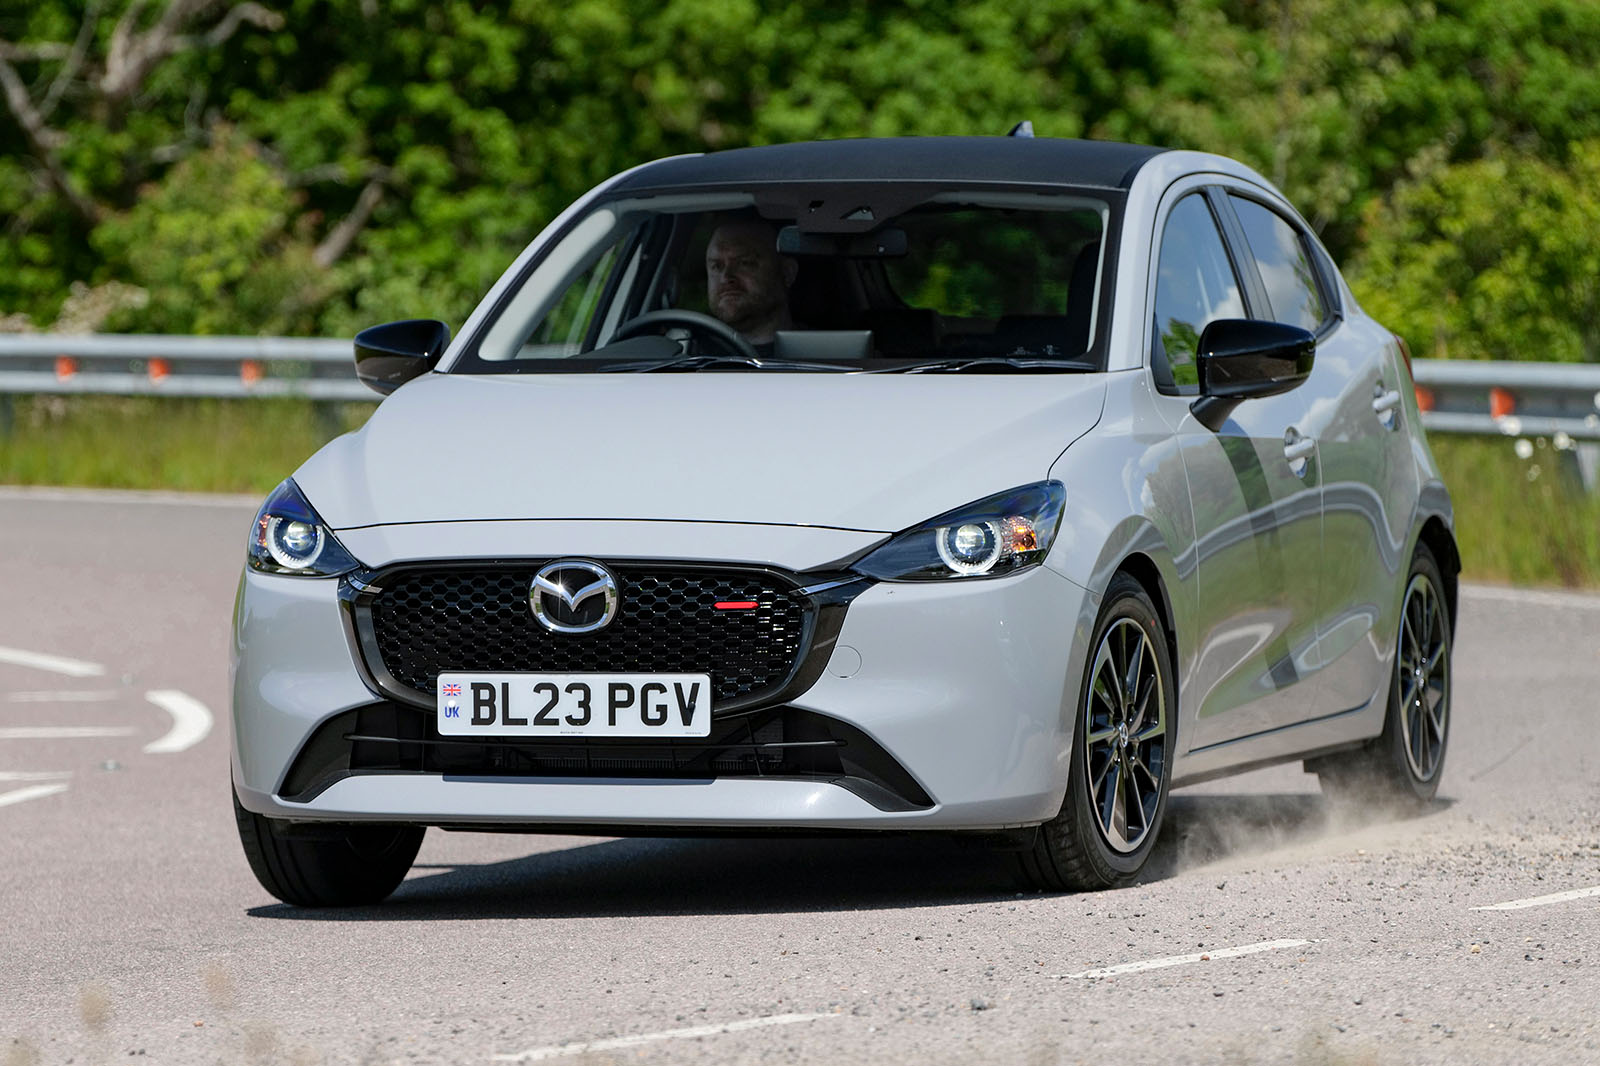 New Mazda2 Hybrid 2022 (Select)  Visual Review, Exterior, Interior,  Infotainment & Boot 